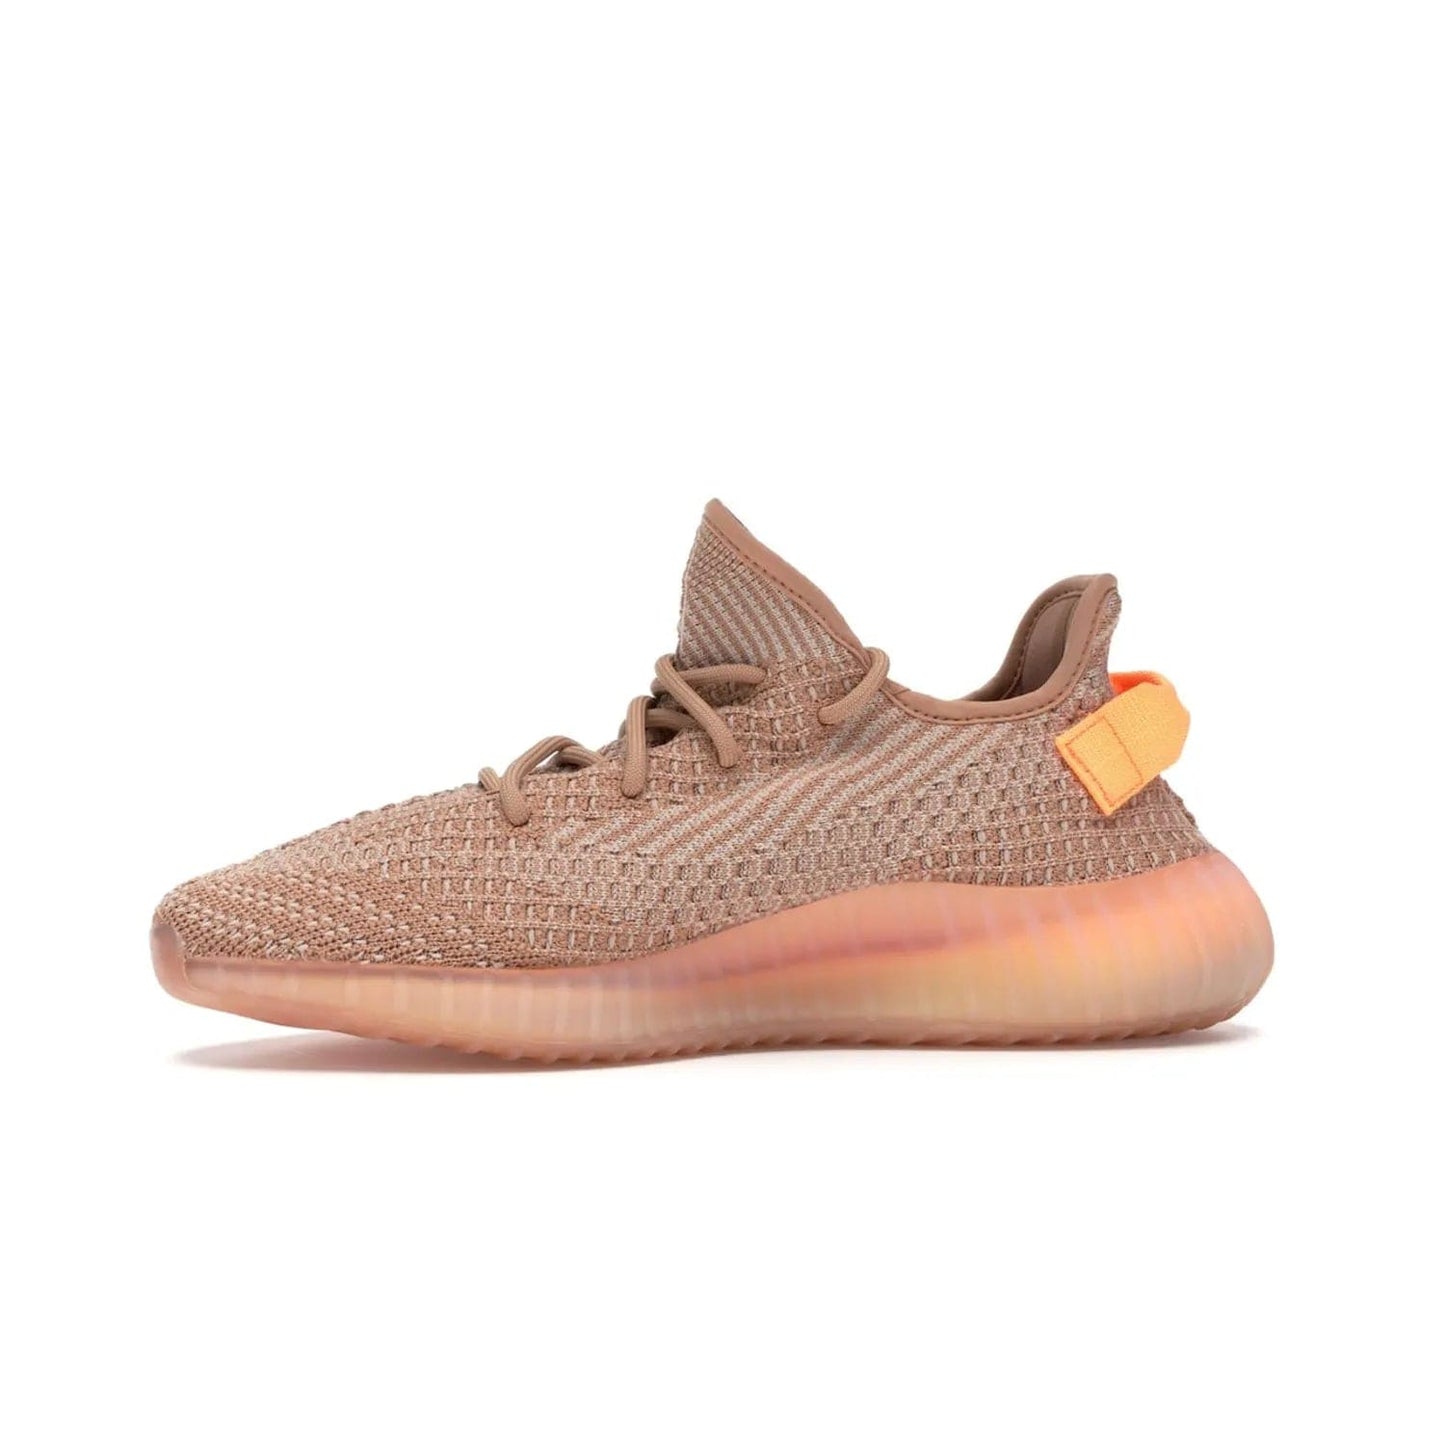 adidas Yeezy Boost 350 V2 Clay - Image 18 - Only at www.BallersClubKickz.com - The adidas Yeezy Boost 350 V2 Clay - style and swag in one shoe. Orange accents, clay midsole and sole. Get yours today!